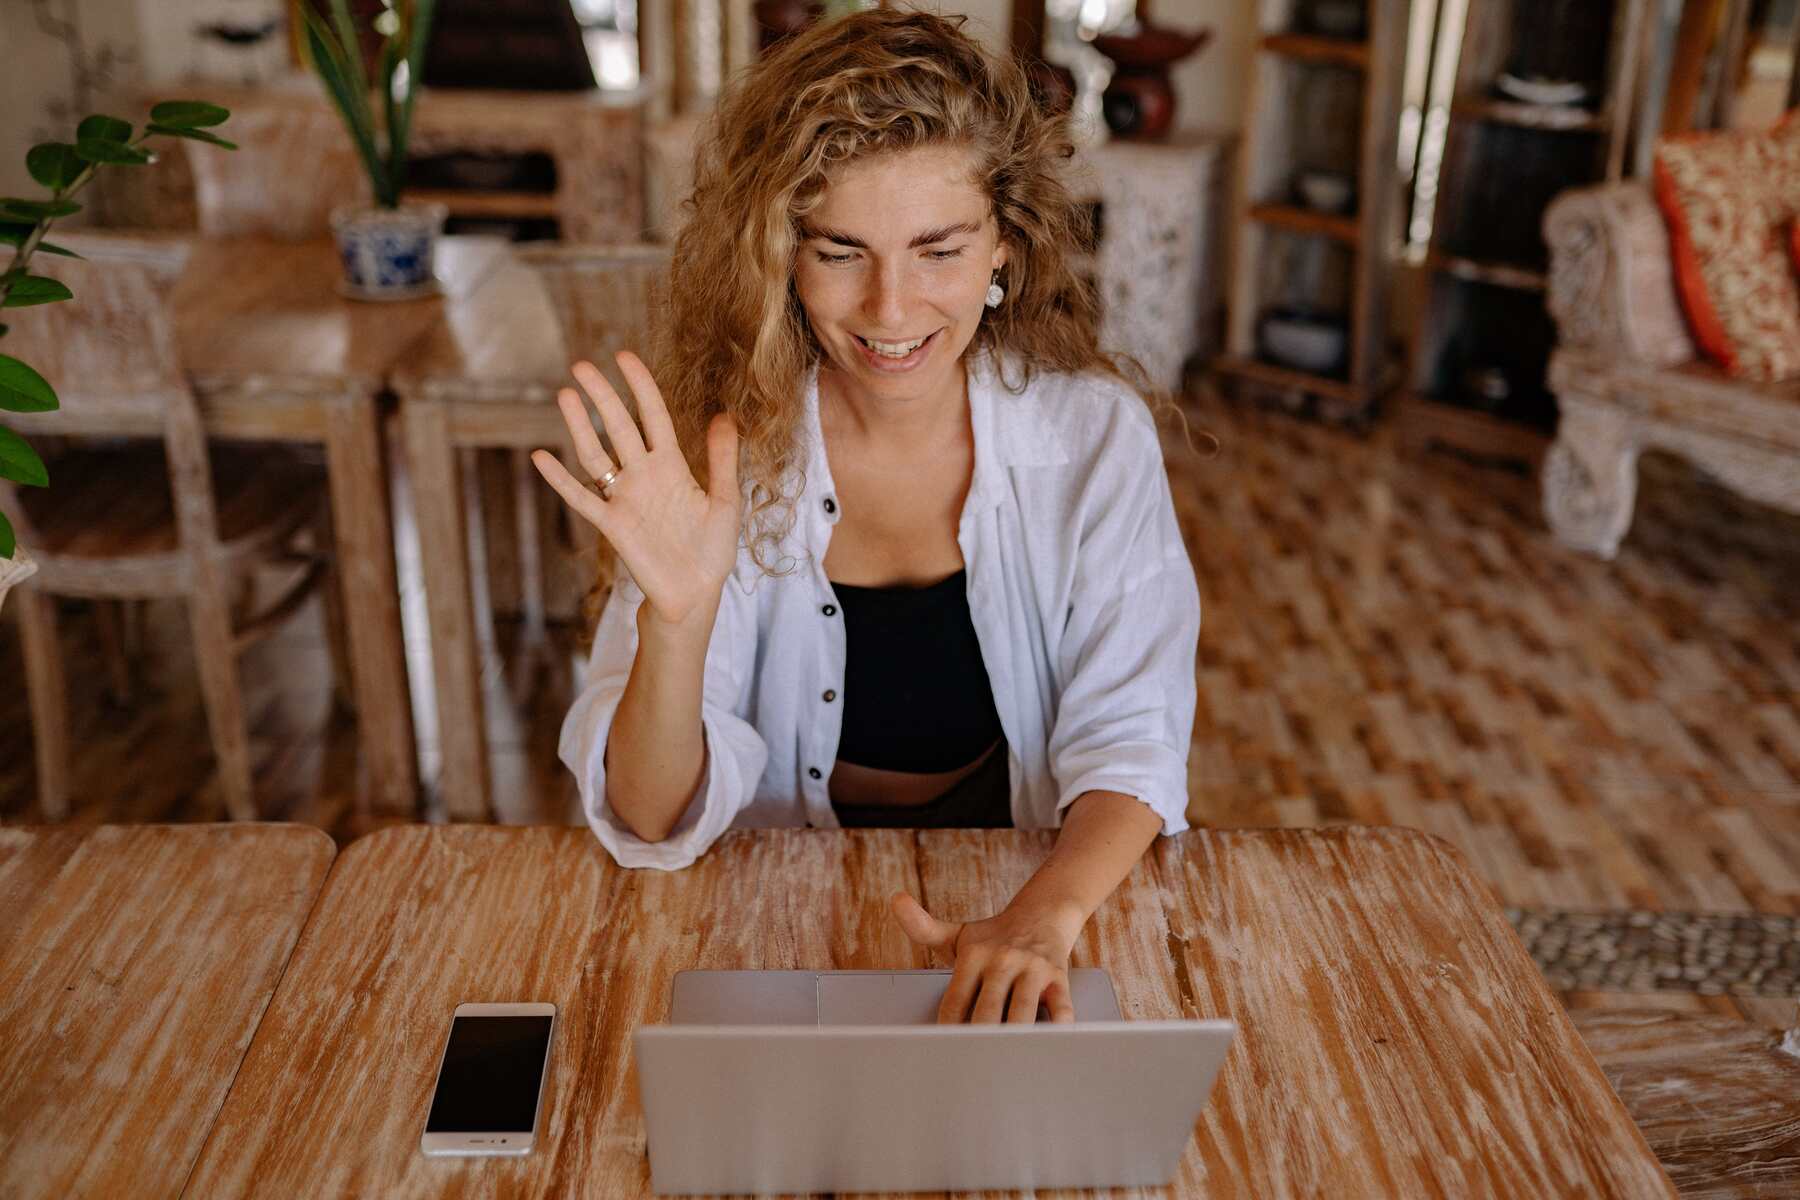 Woman smiling and waving at her laptop screen while sitting at a wooden table in a living room